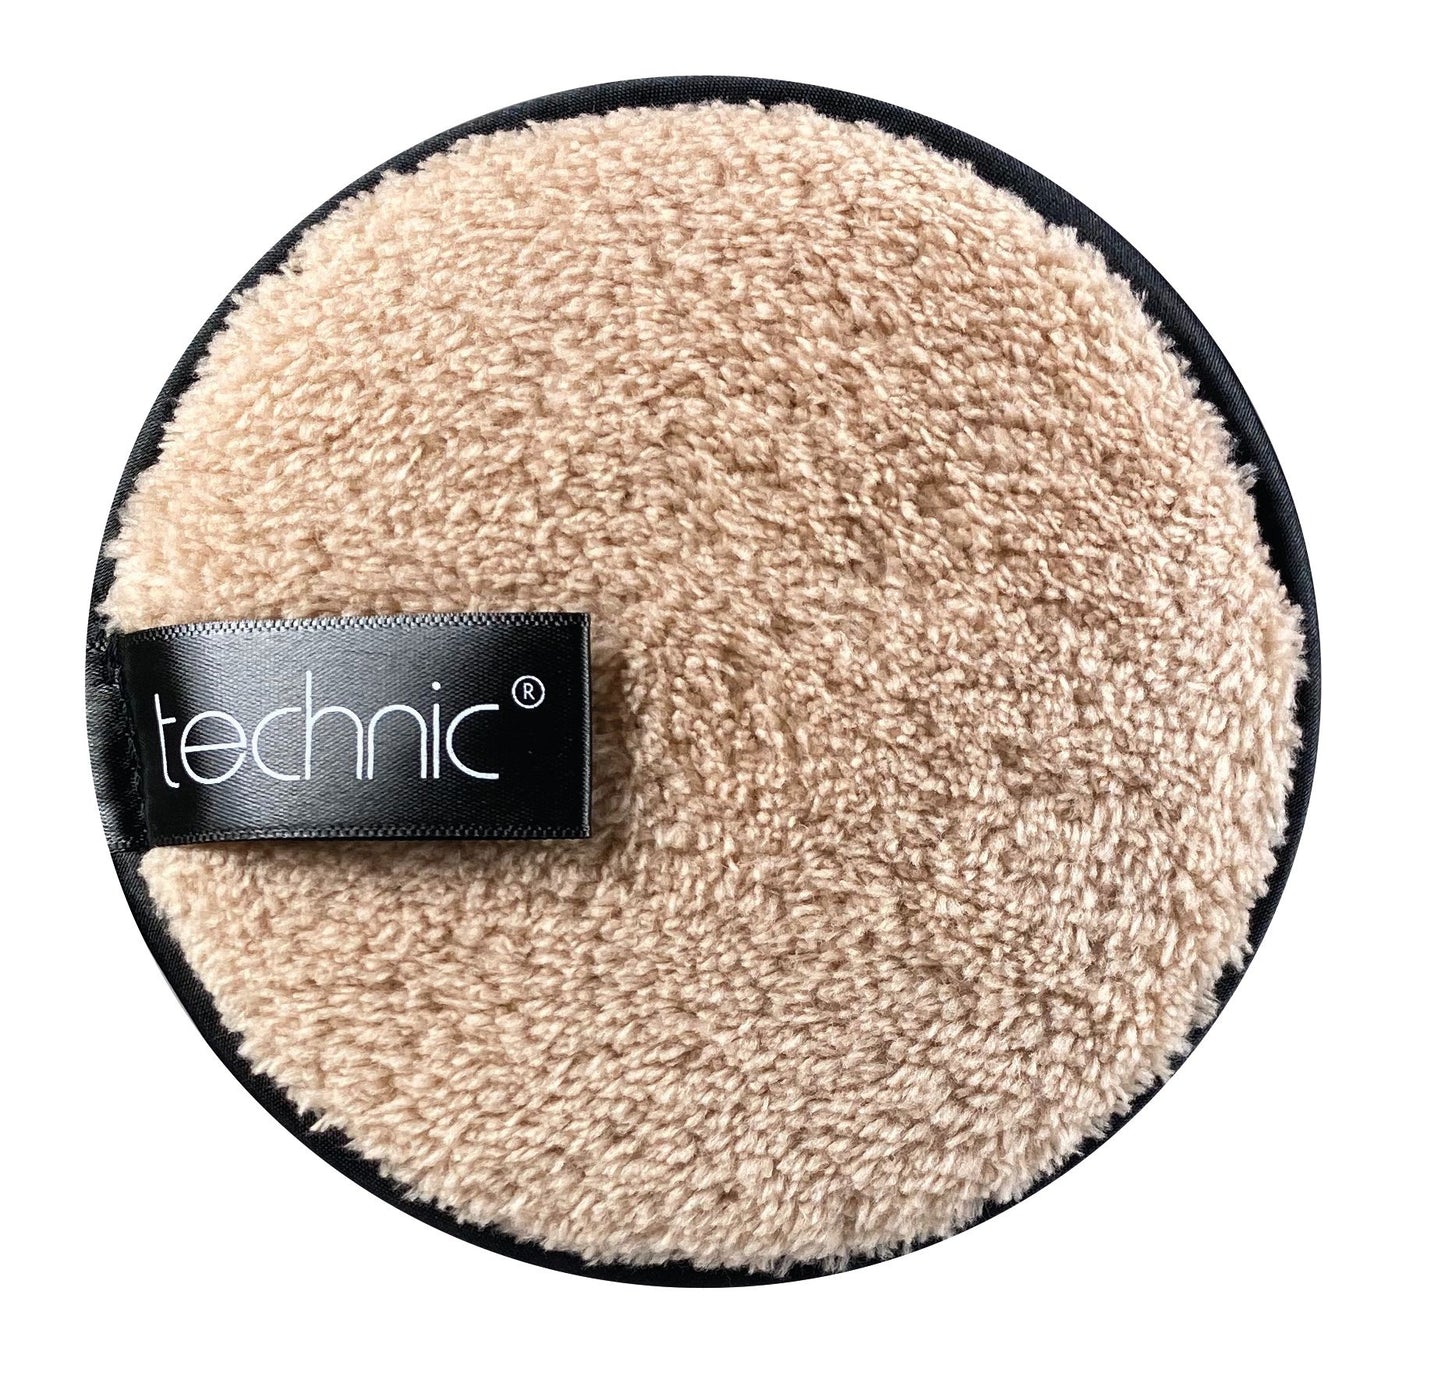 Technic Miracle Makeup Remover